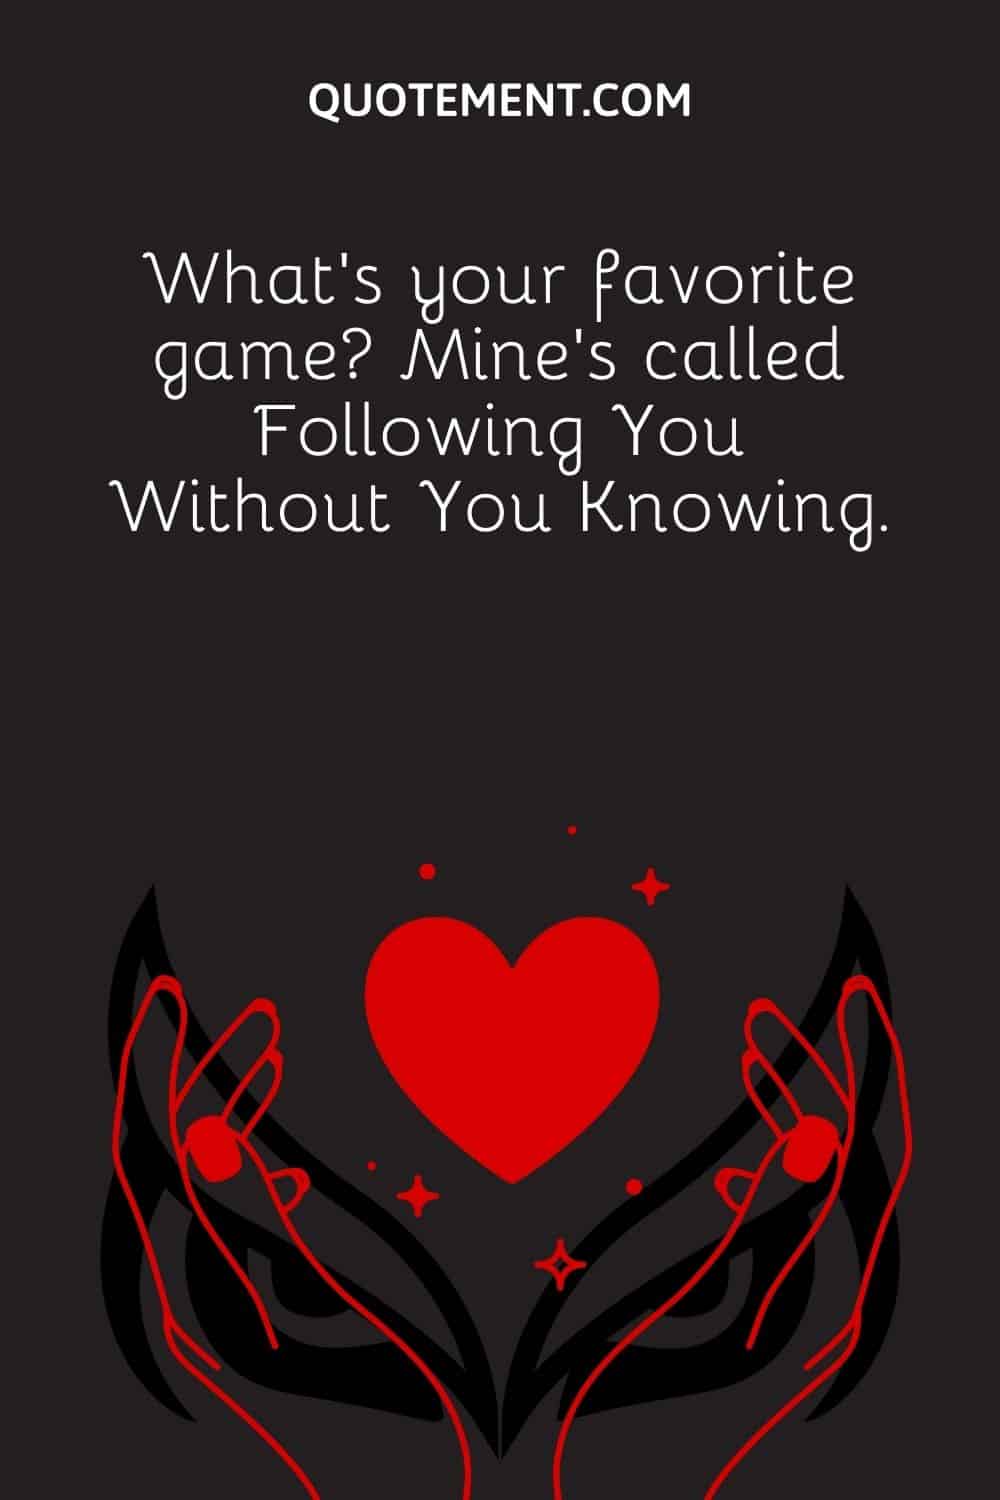 What’s your favorite game Mine’s called Following You Without You Knowing